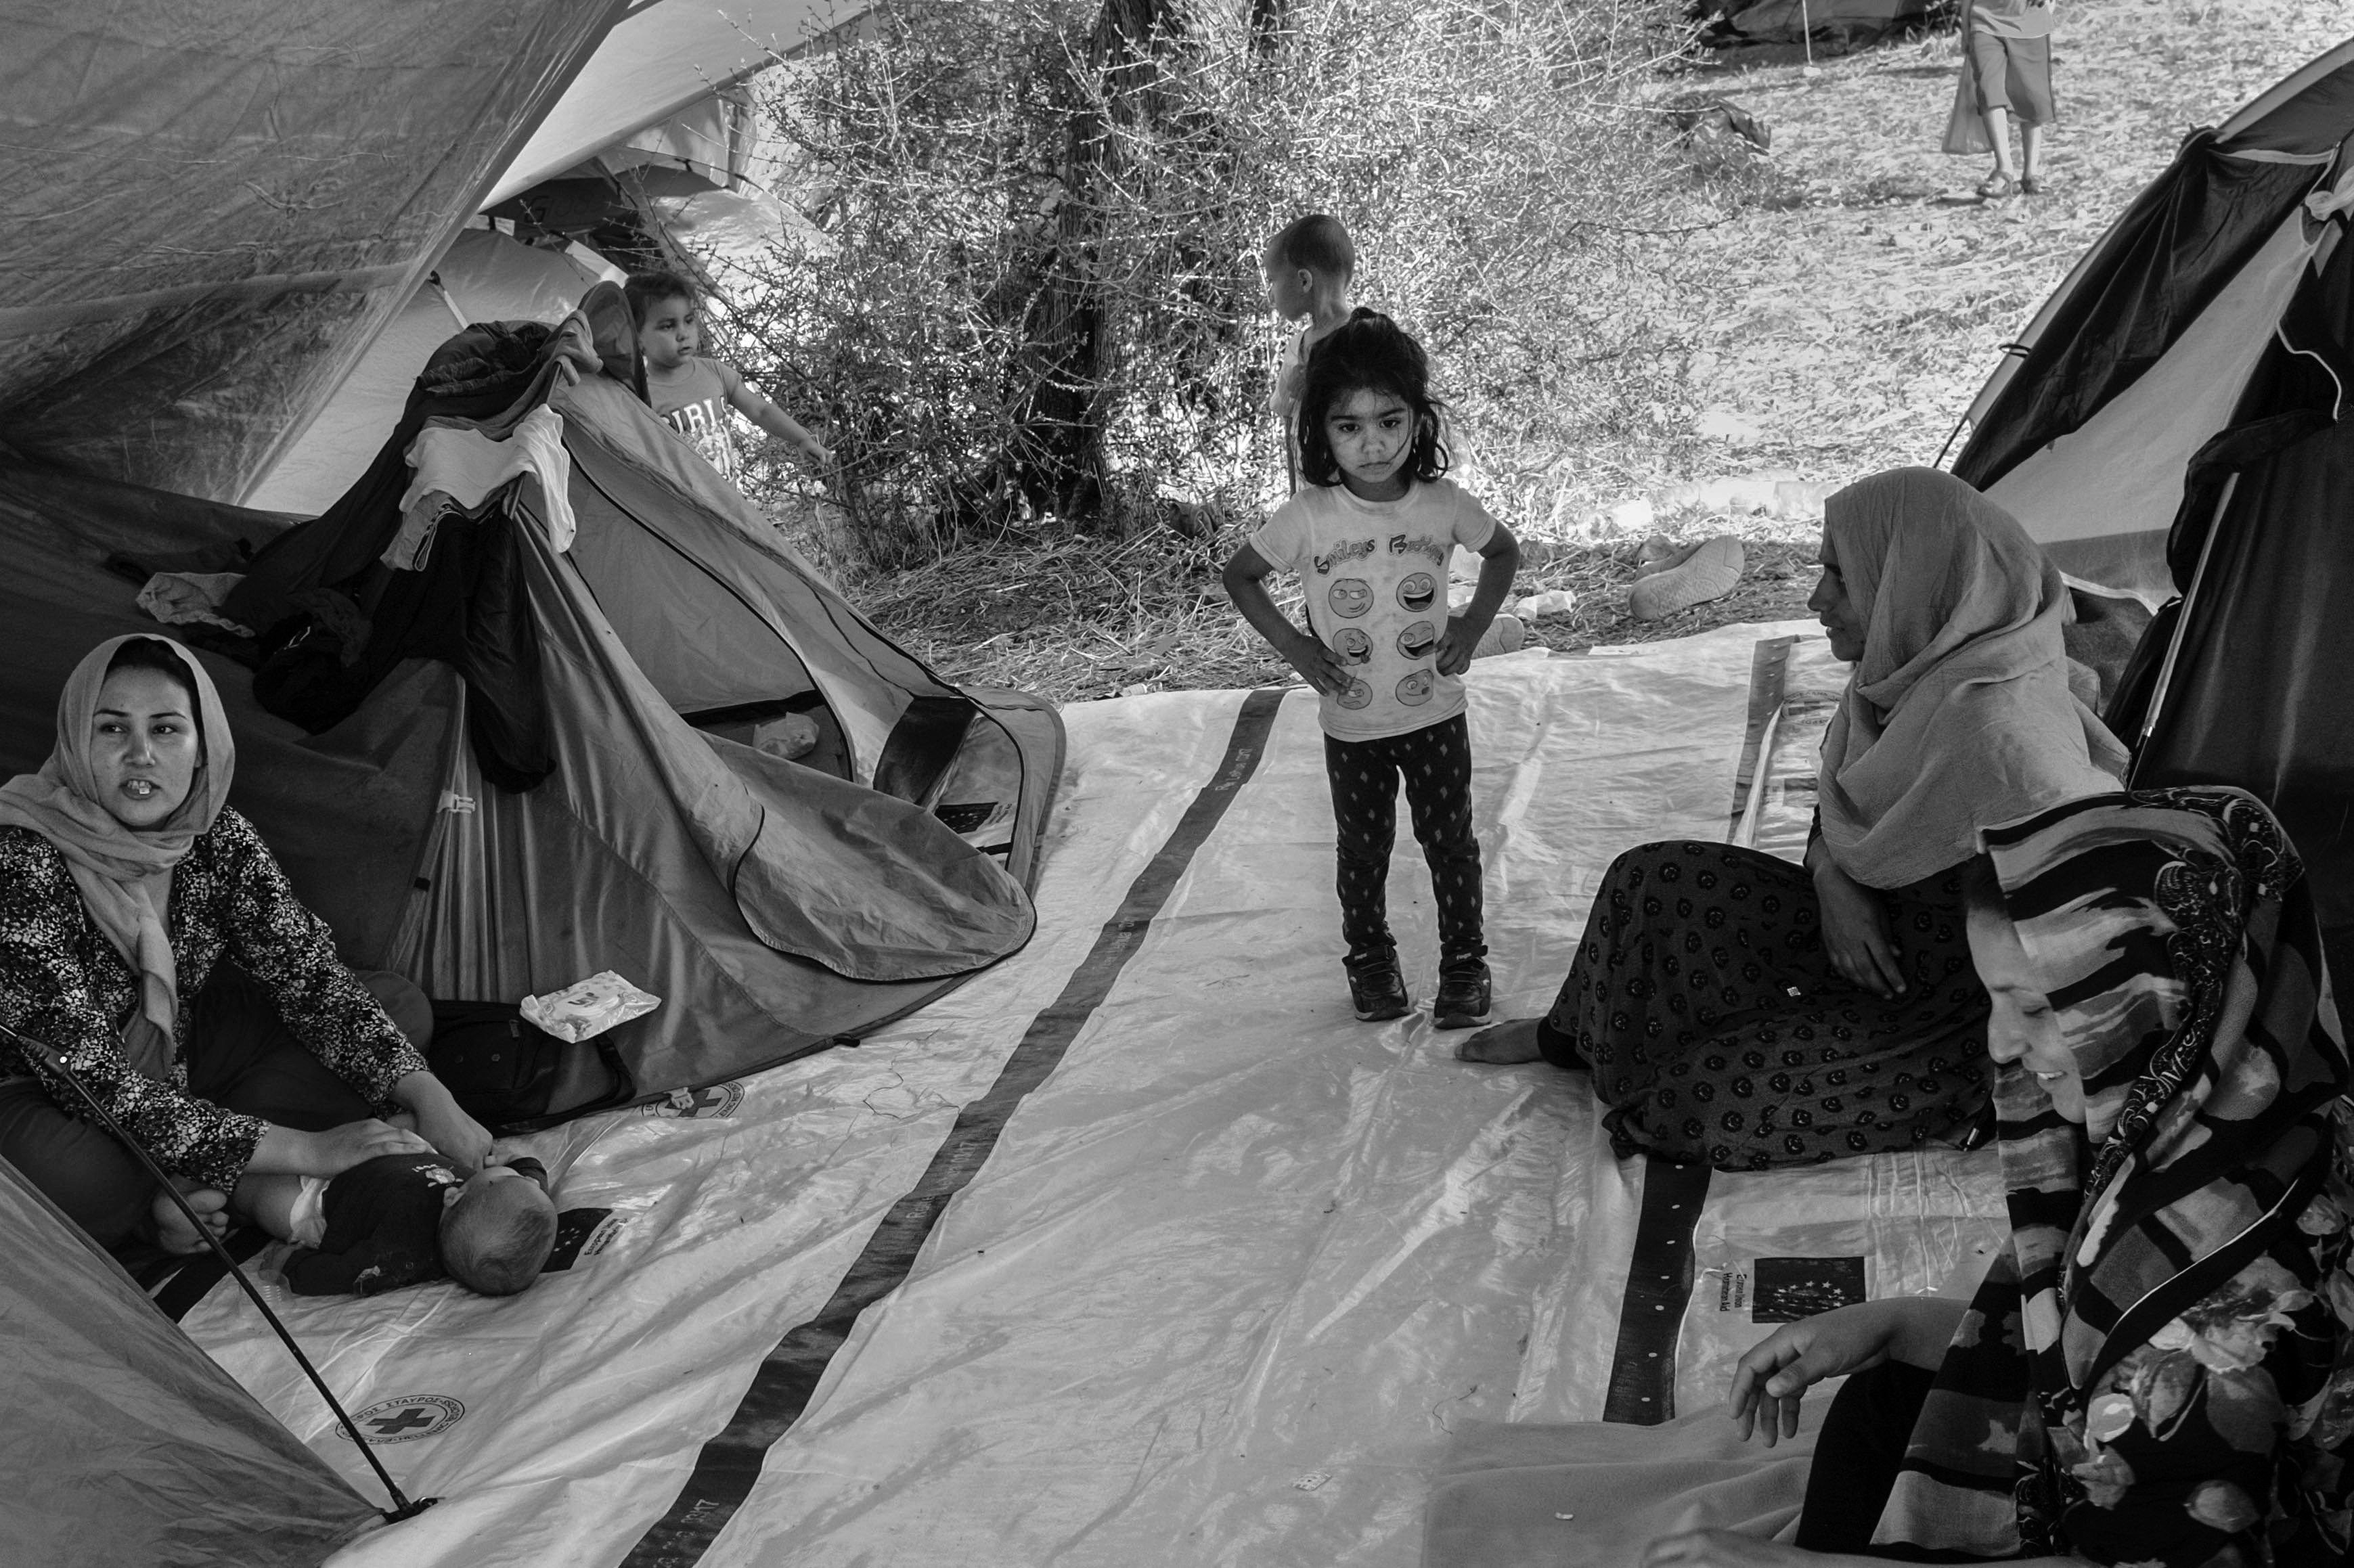 A Syrian family just arrived at the Olive Groove extension at refugee camp Moria, Lesbos, Greece